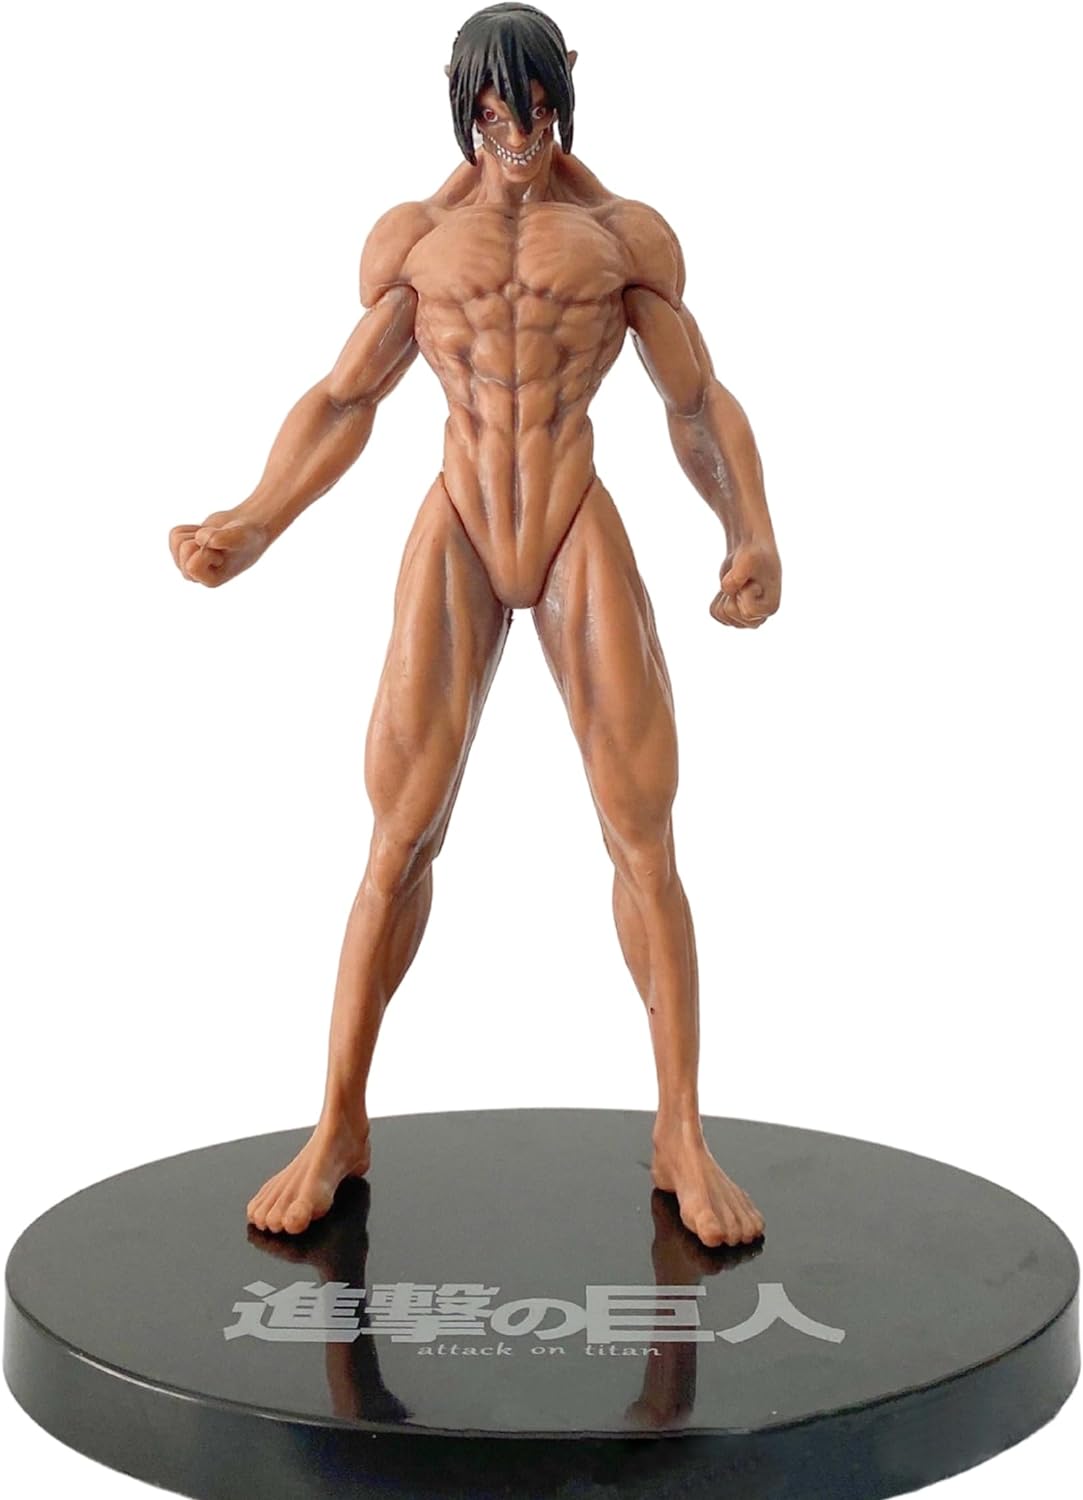 Attack On Titan Merch Anime Figure Eren Yeager Figure Collectible Ornament Character For Home Desk Car Decoration Attack On Titan Figures Attack On Titan Toys